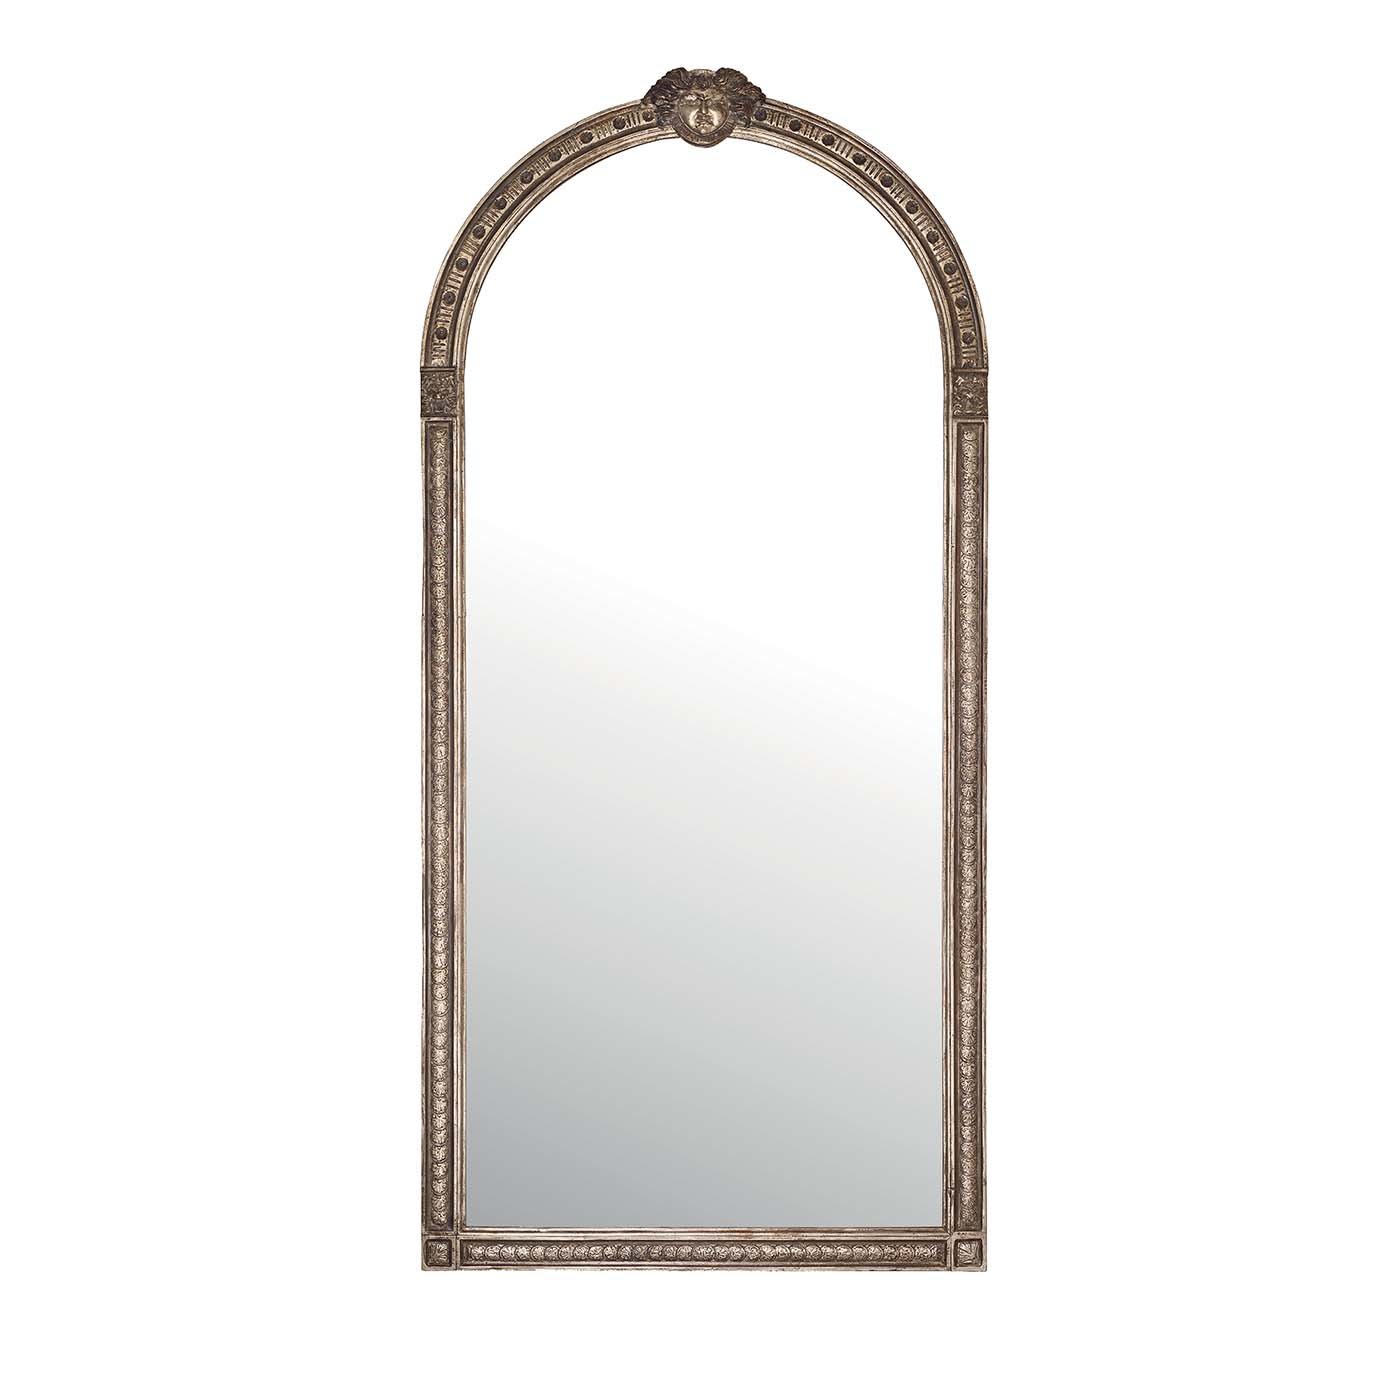 Archway Wall Mirror in Lime Wood - La Casa Grifoni